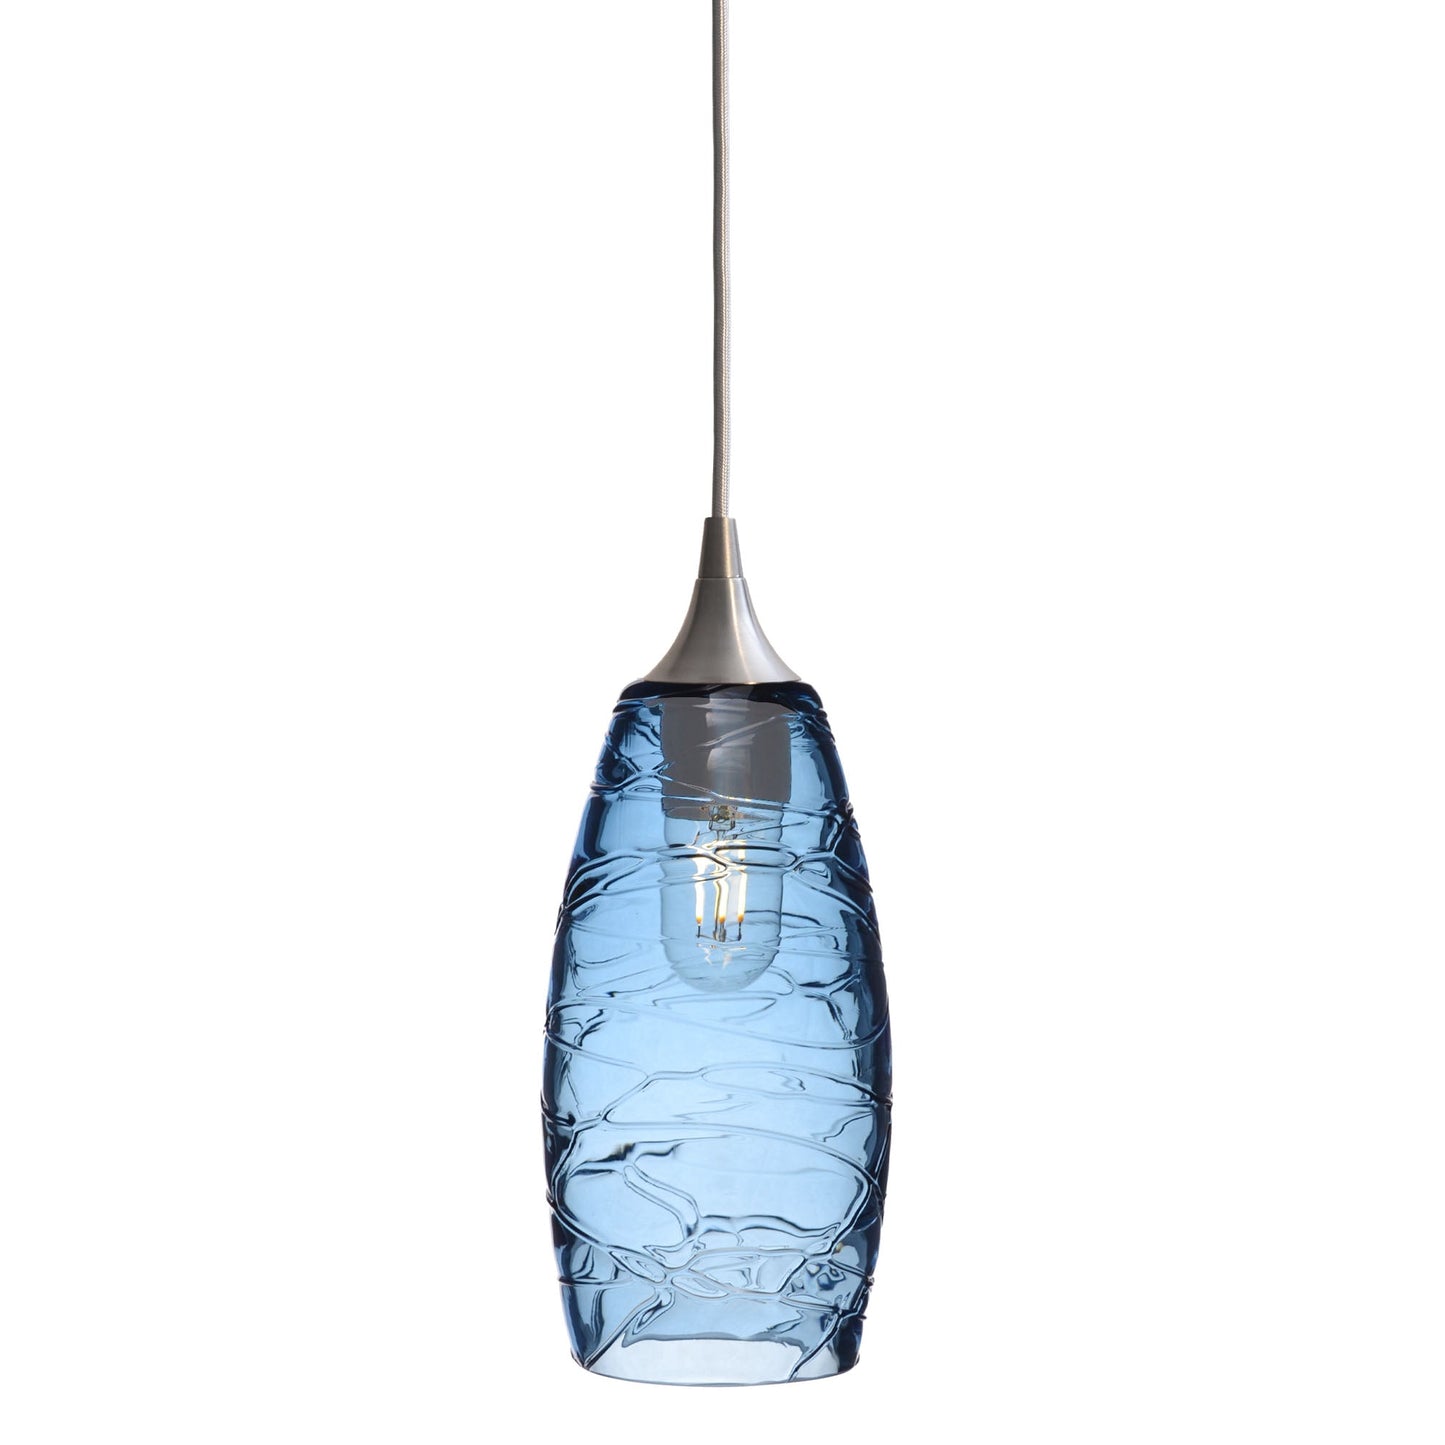 147 Spun: Single Pendant Light-Glass-Bicycle Glass Co - Hotshop-Steel Blue-Brushed Nickel-Bicycle Glass Co